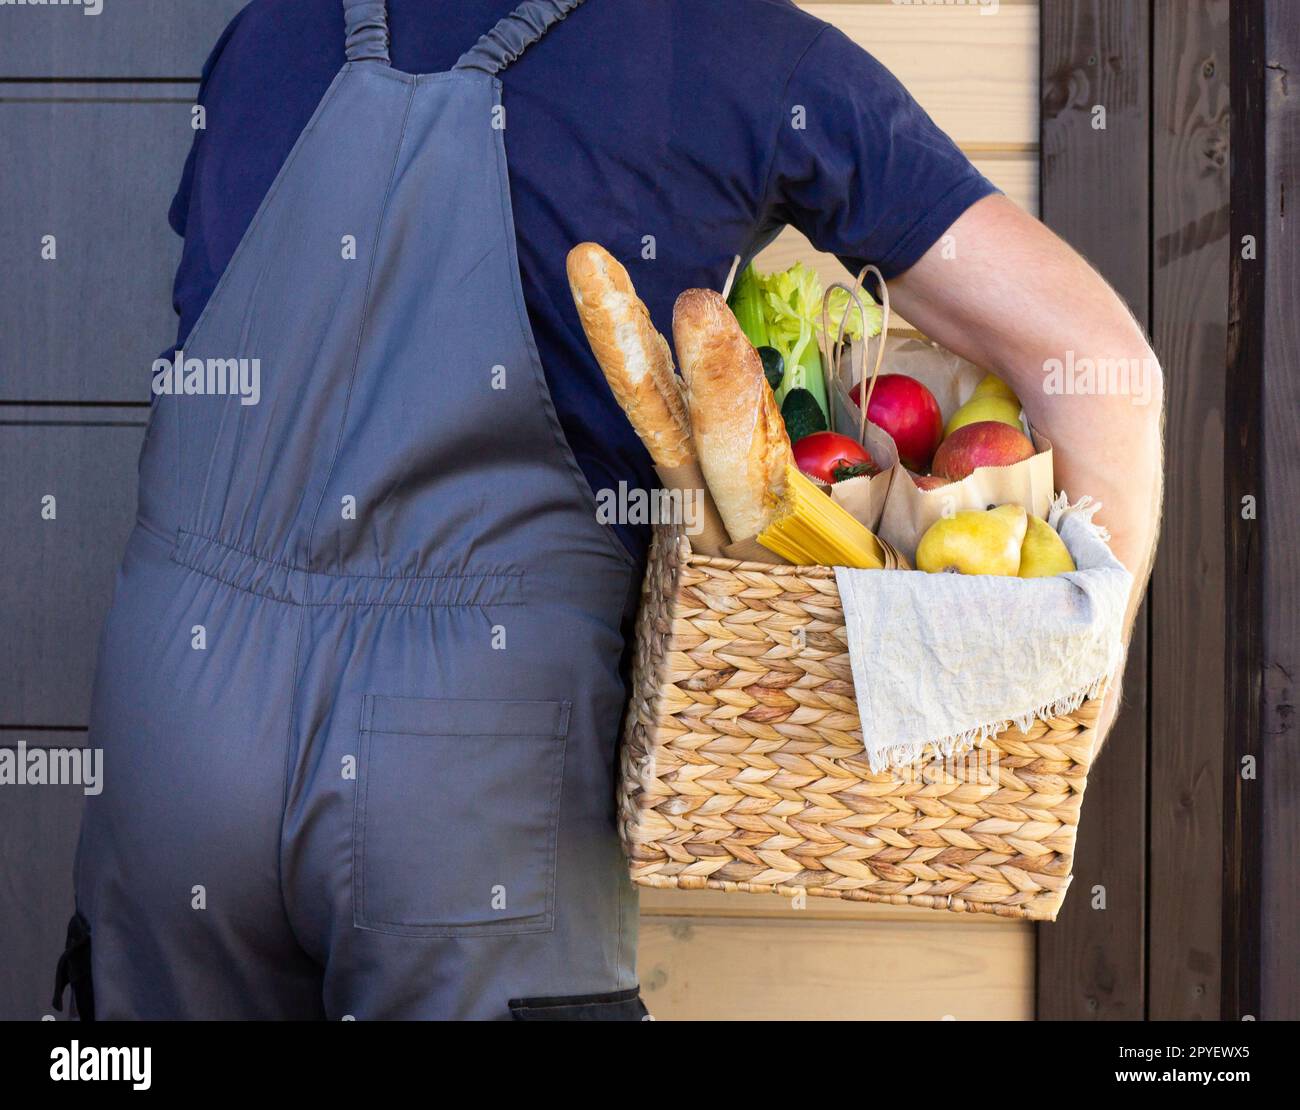 Fresh organic food in a wicker basket in the hands of a bicycle courier. Bike delivery or donation of food concept. Stock Photo